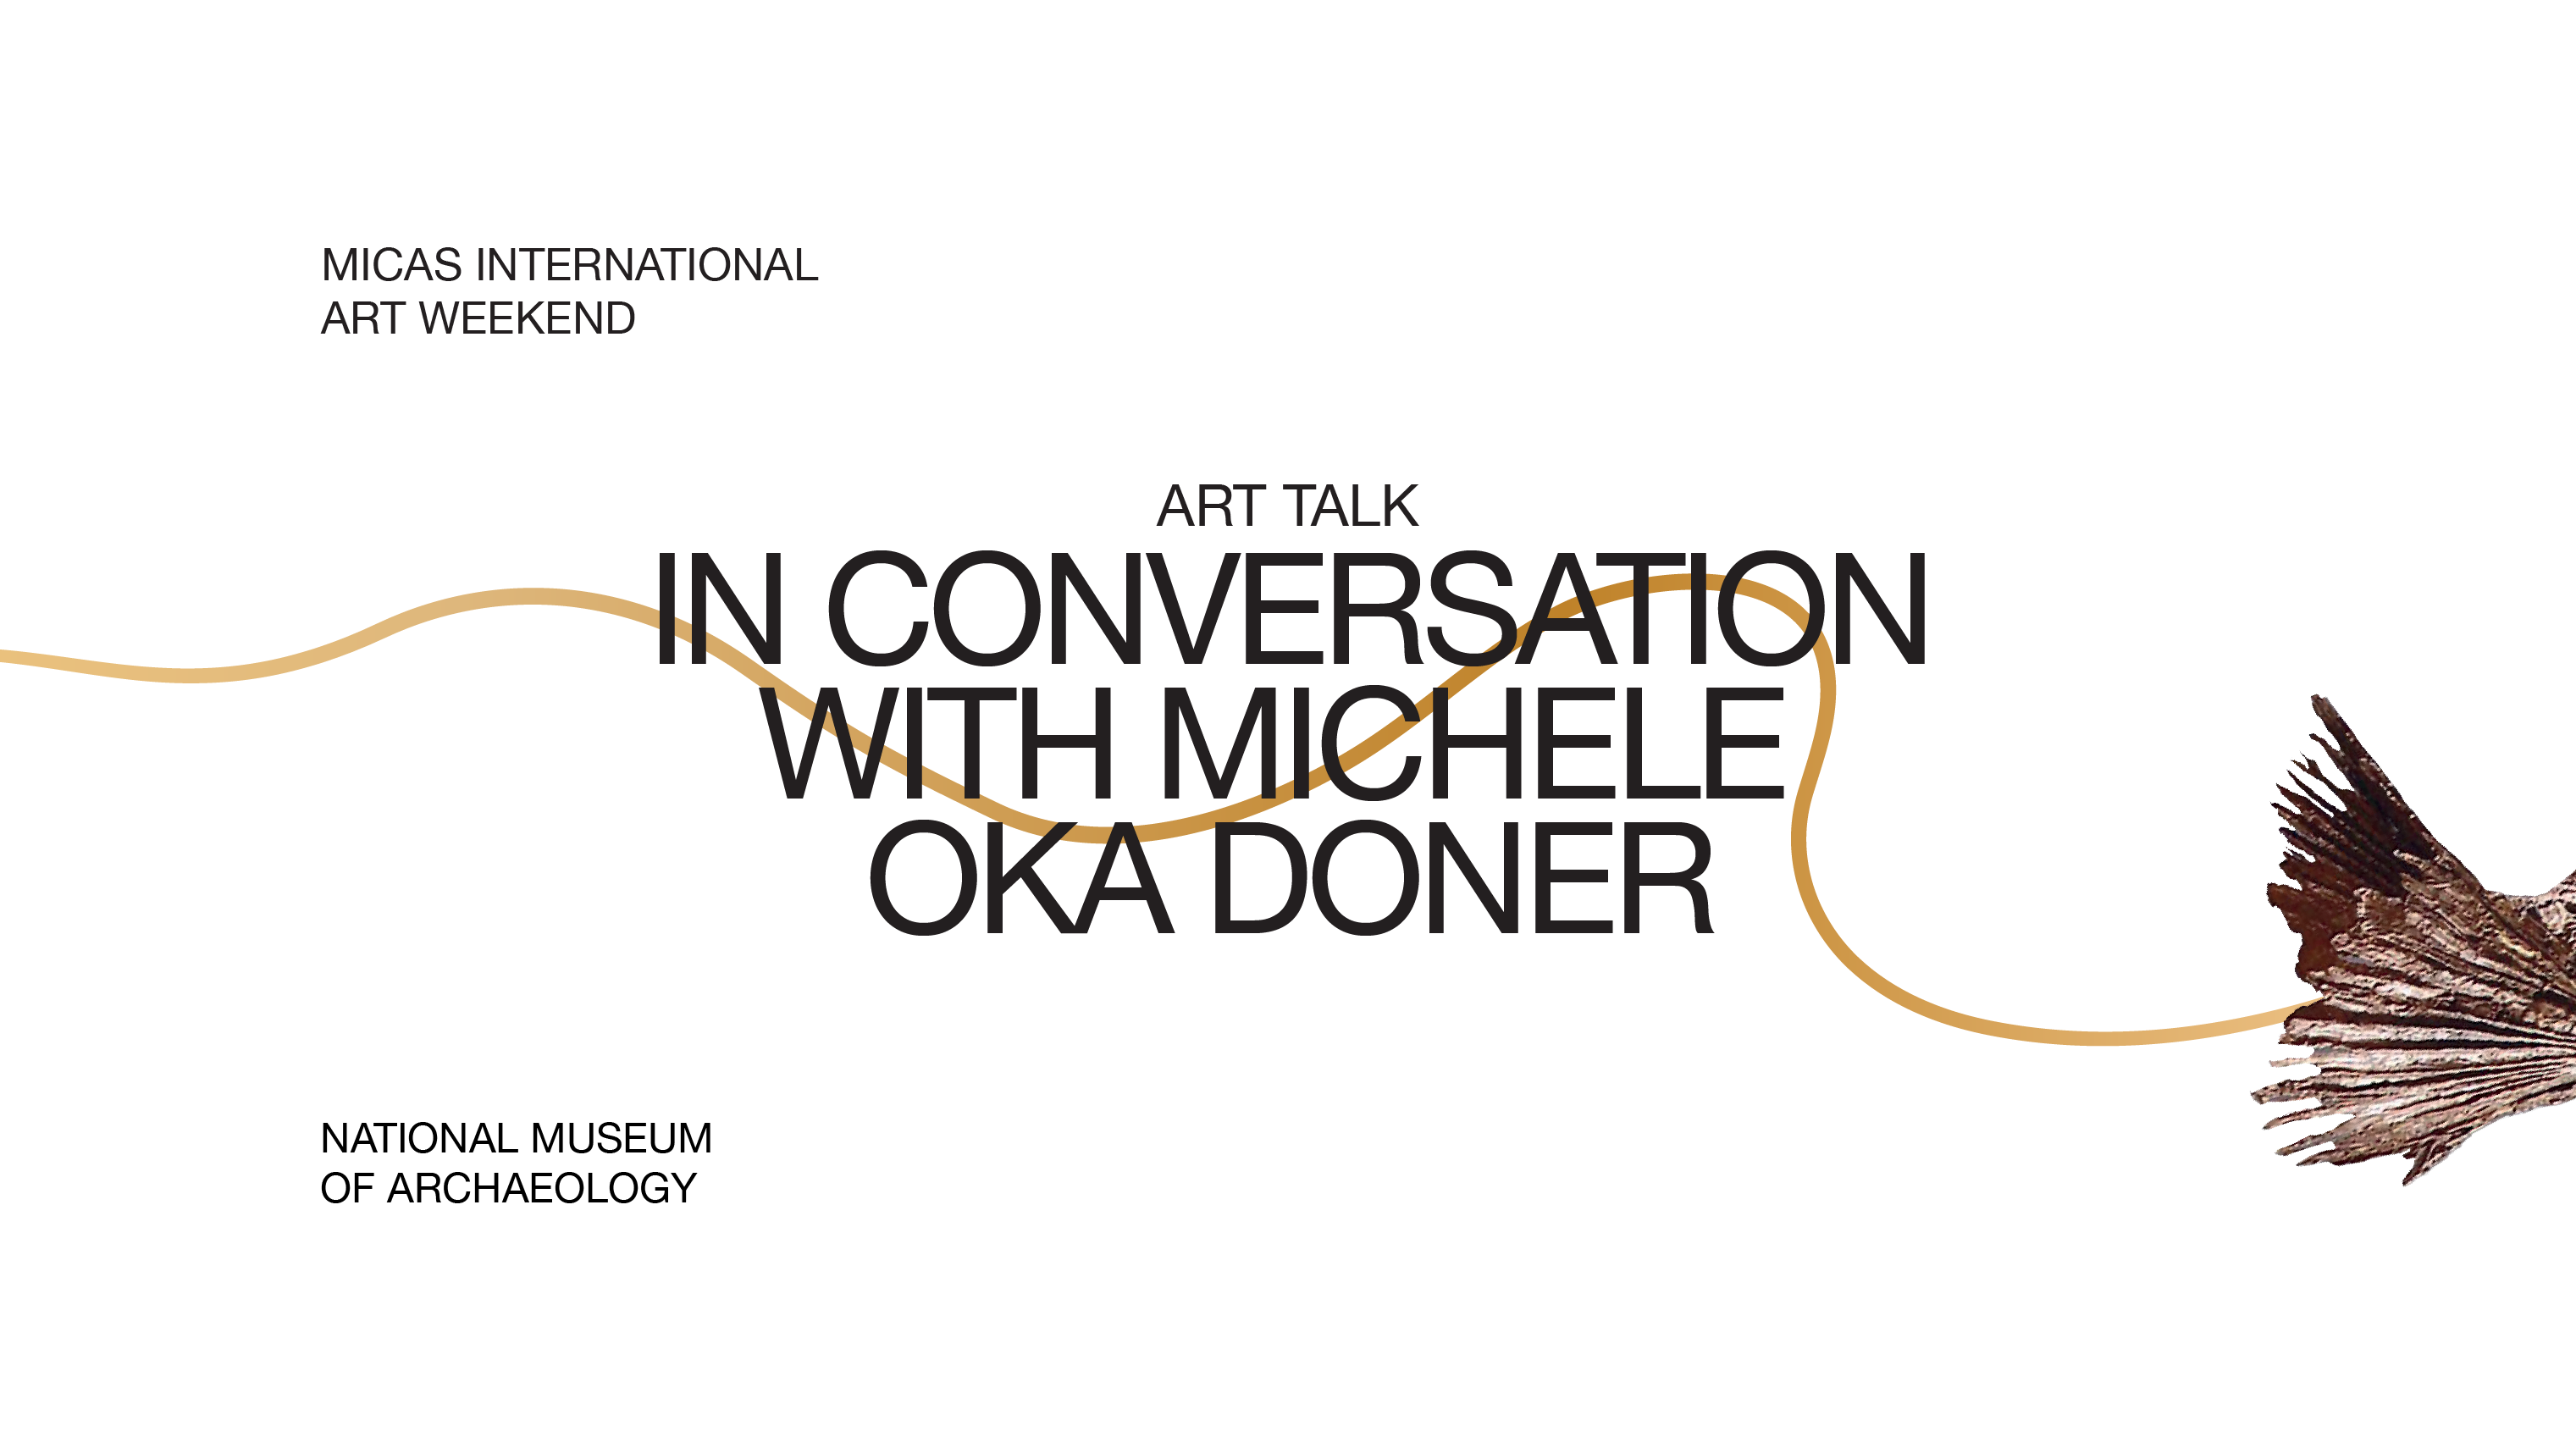 MICAS Art Talk: In Conversation with Michele Oka Doner